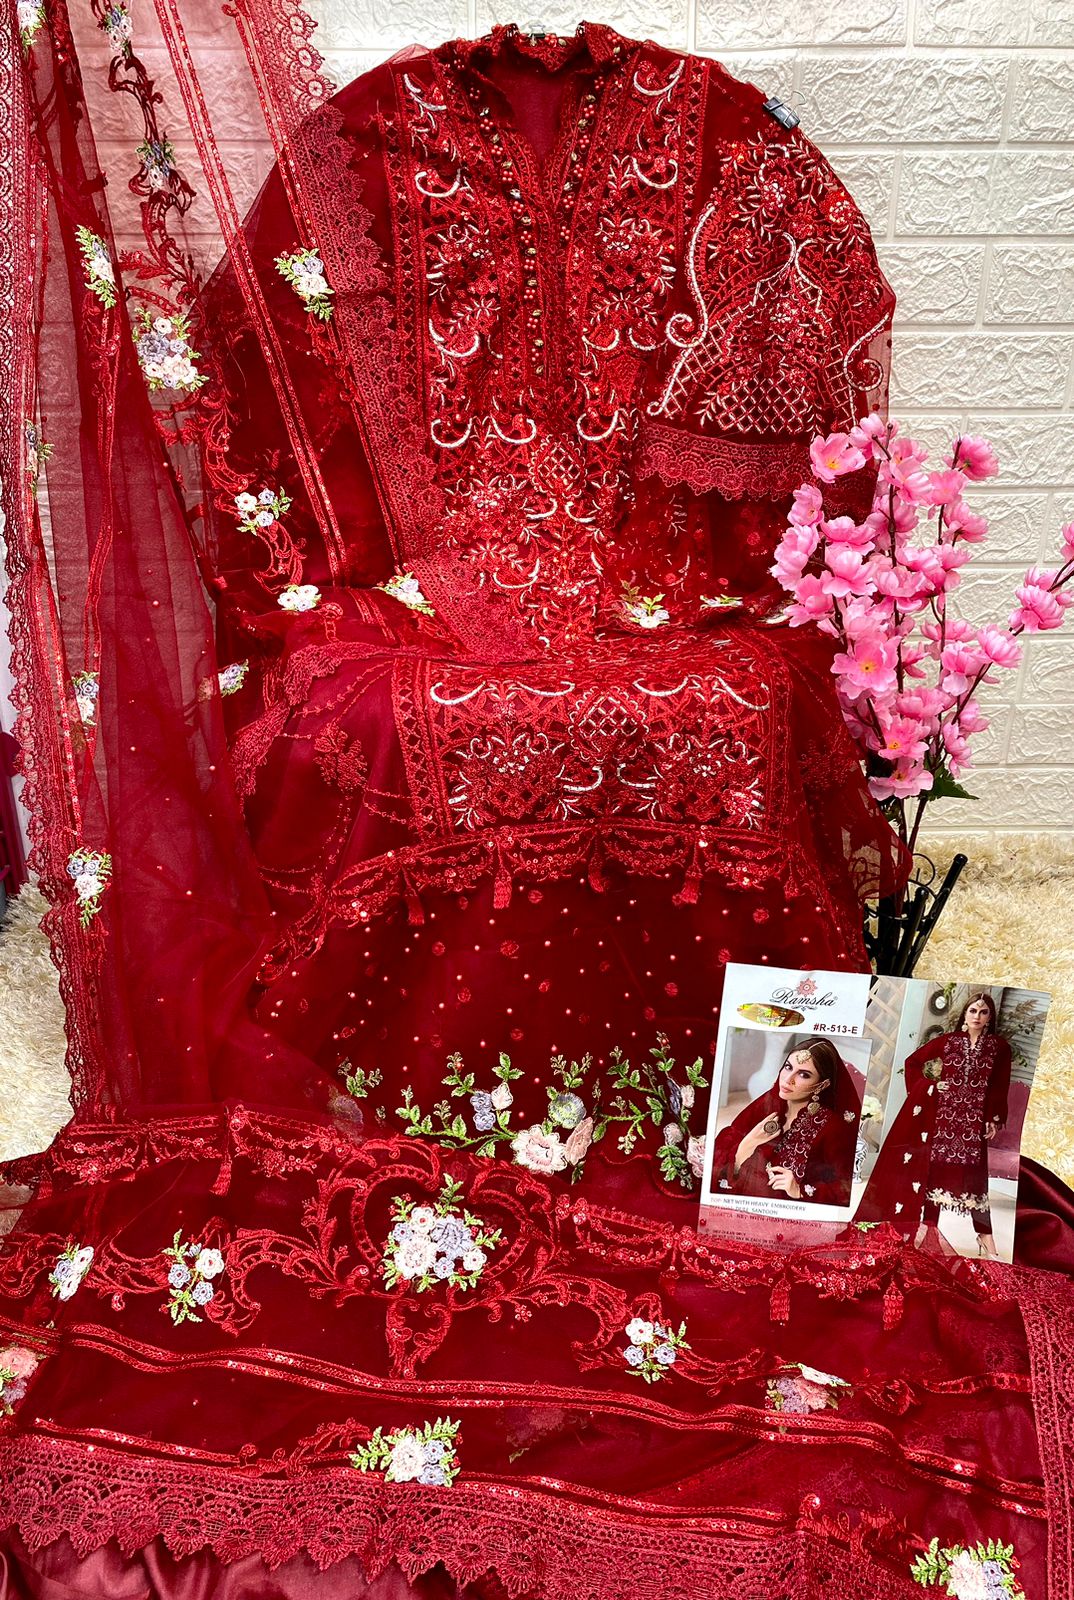 Ramsha R-513 Nx Net With Embroidery Suit Anant Tex Exports Private Limited